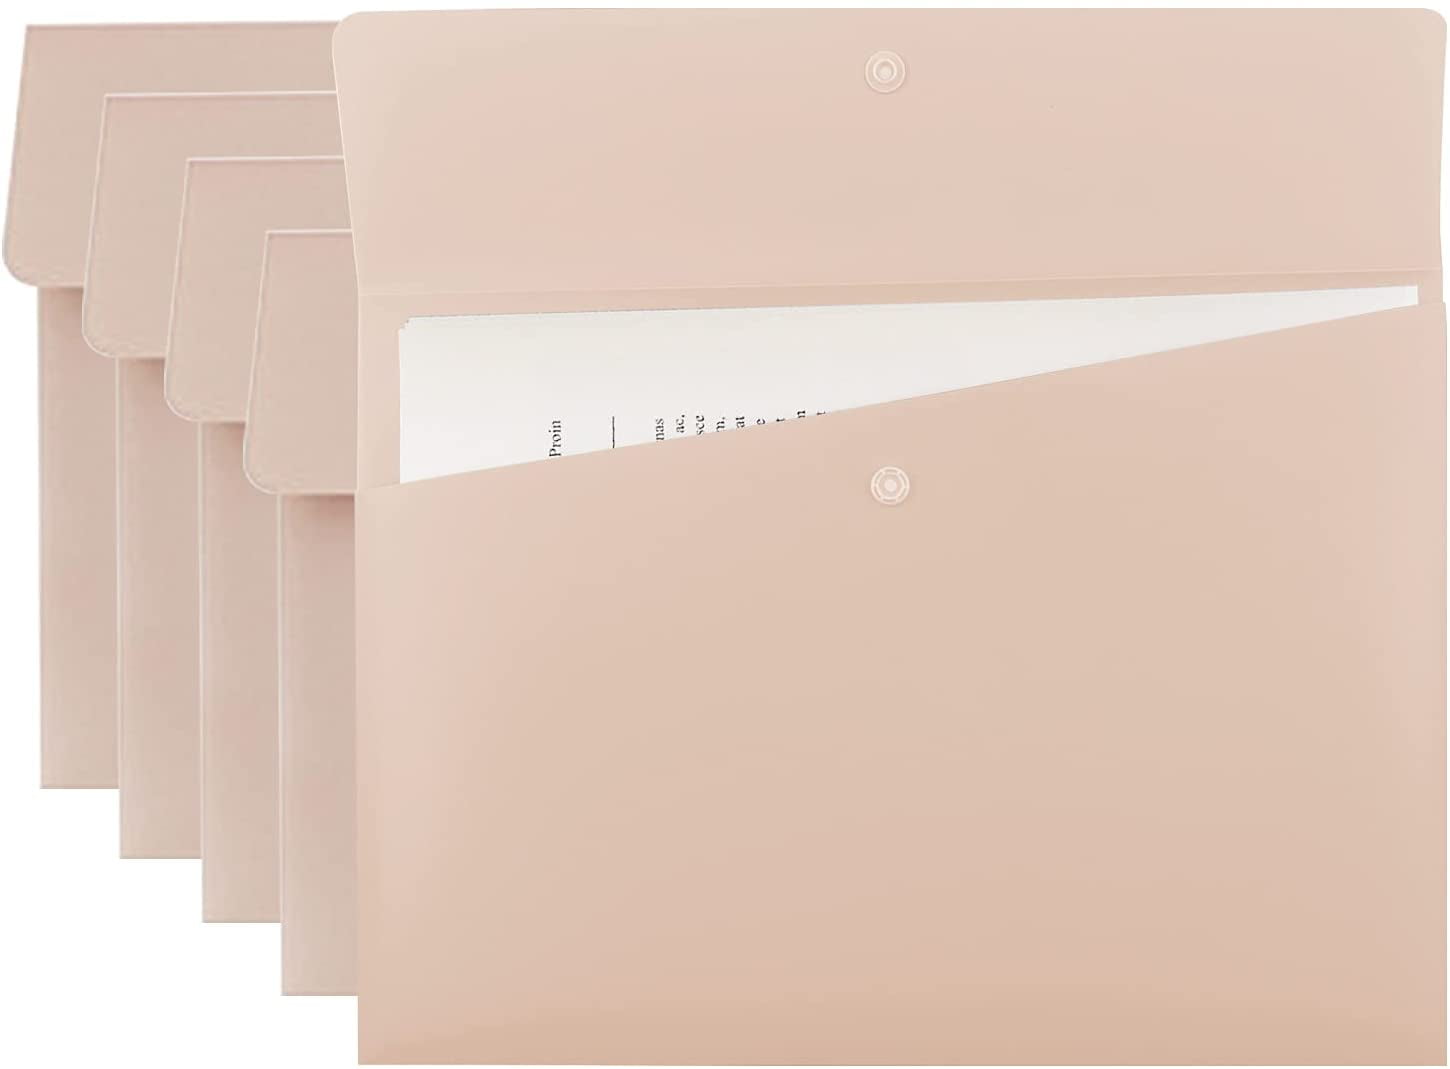 Pack of 2 A4 Zip-Seal Clear Document Filing Plastic Wallets Folders Pink Green 